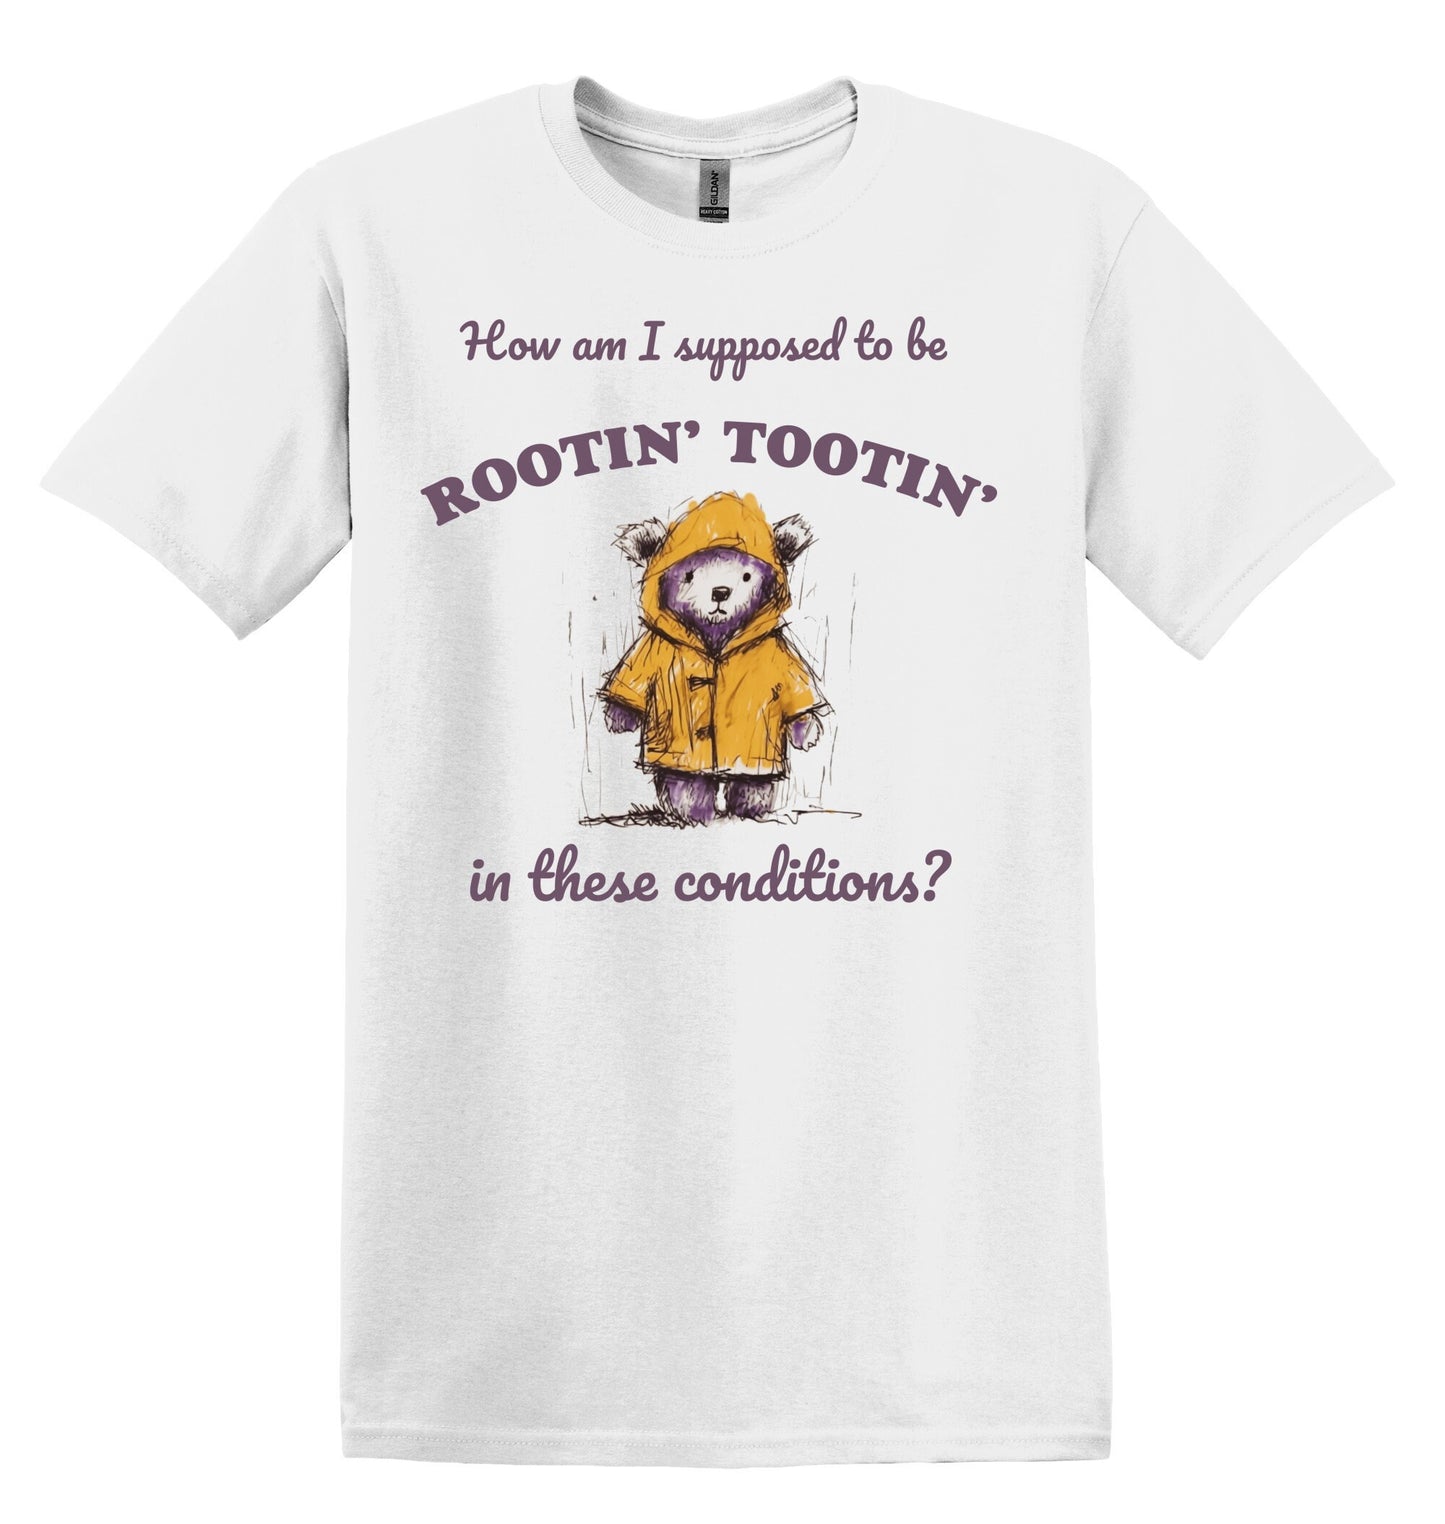 How am I Supposed to Be Rootin Tootin in these Conditions? Shirt Graphic Shirt Funny Vintage Adult Funny Shirt Nostalgia Shirt Cotton Shirt